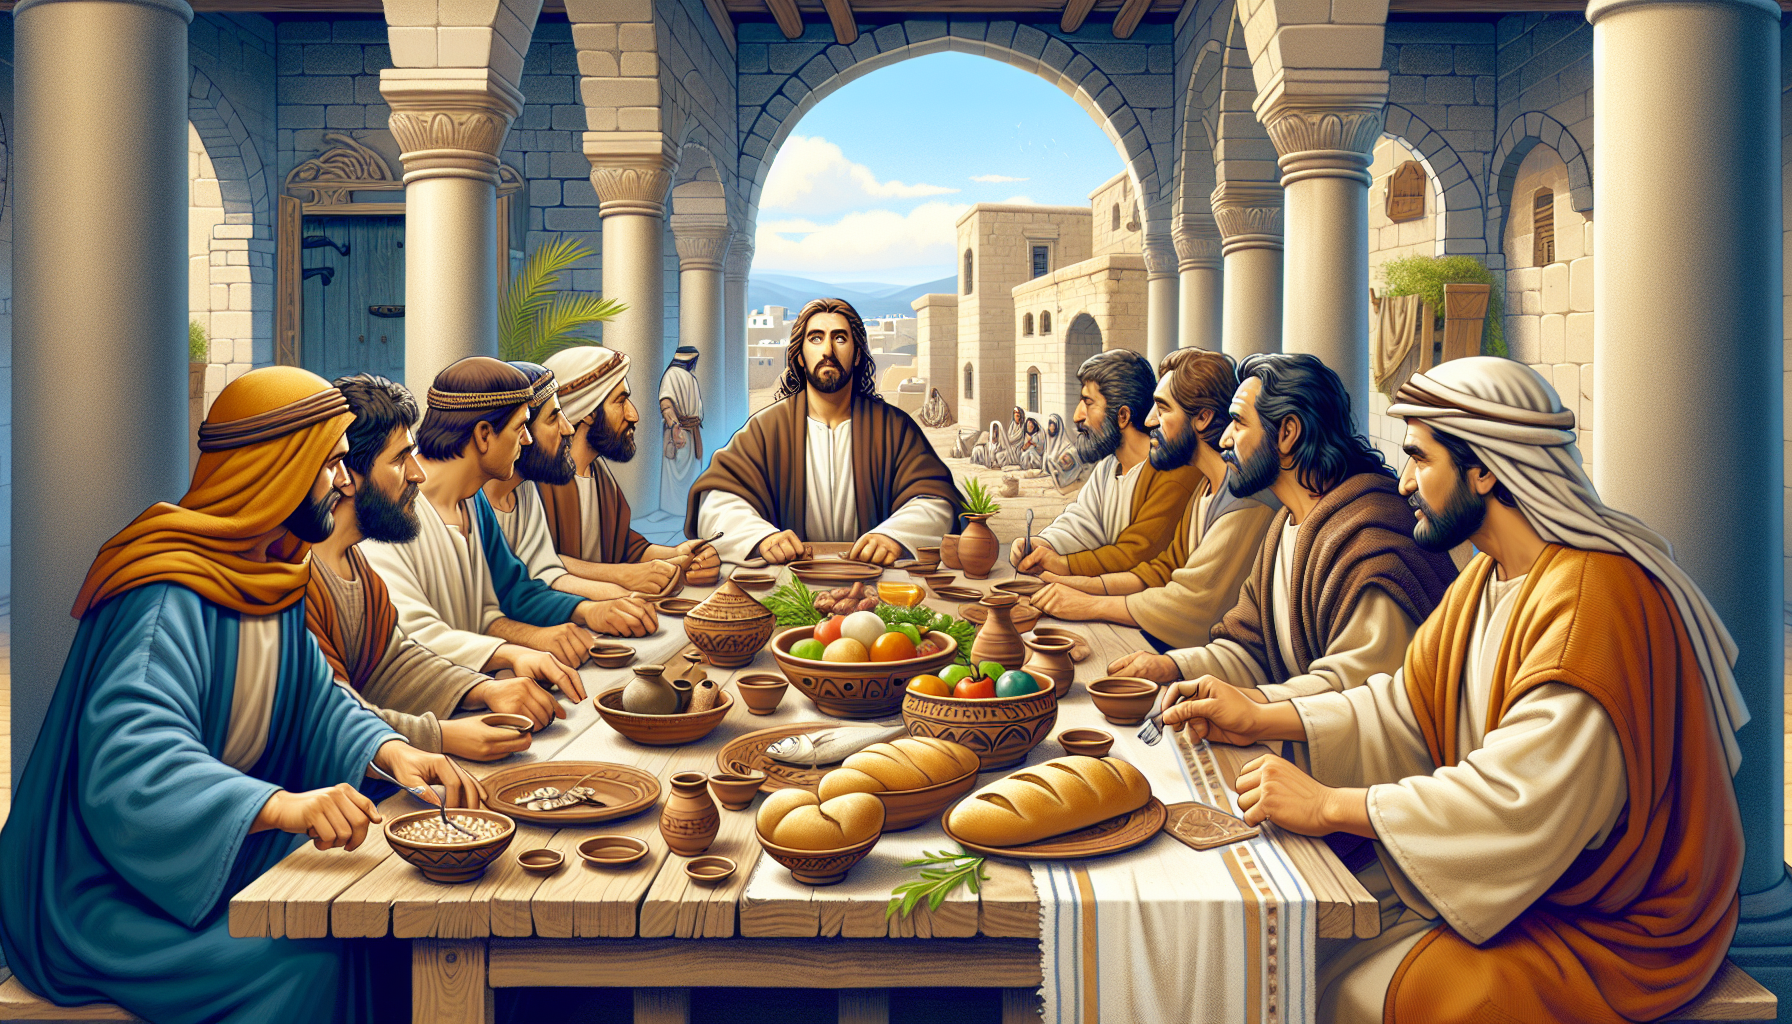 Create a historical scene of Jesus at a long wooden table during a meal with his disciples, with diverse food items such as bread, vegetables, and fish prominently displayed. The setting should evoke